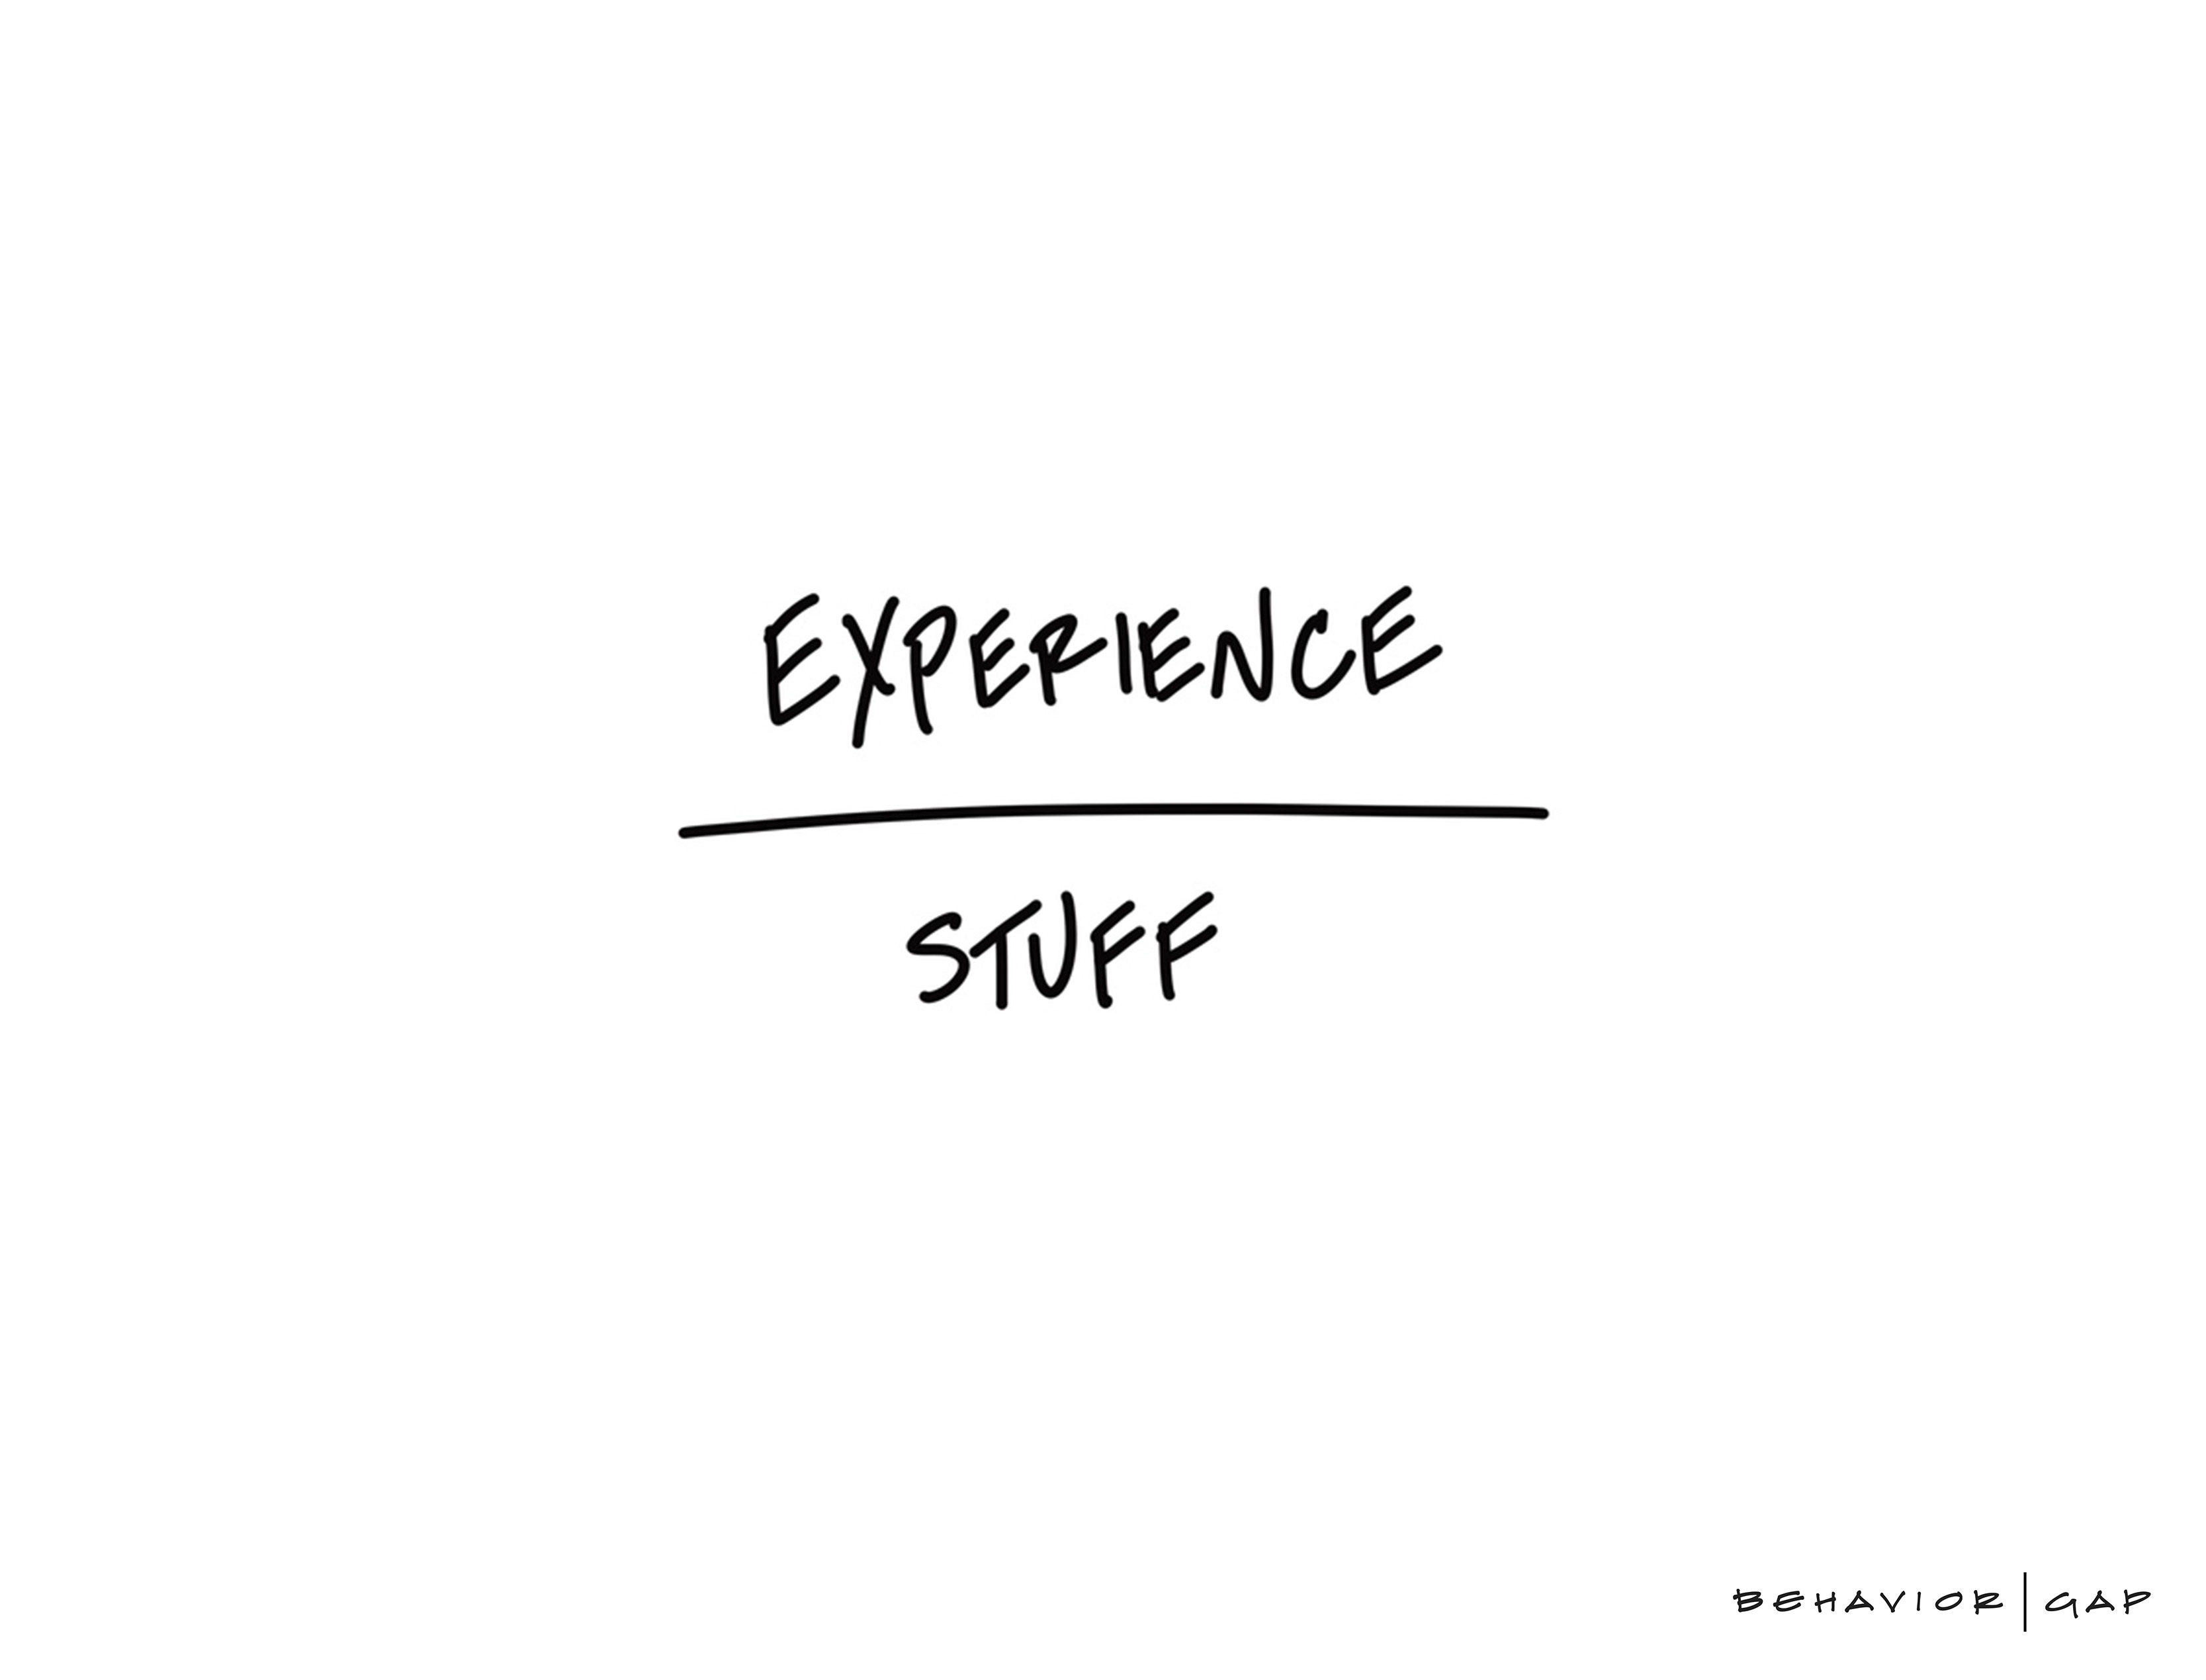 Experience over stuff